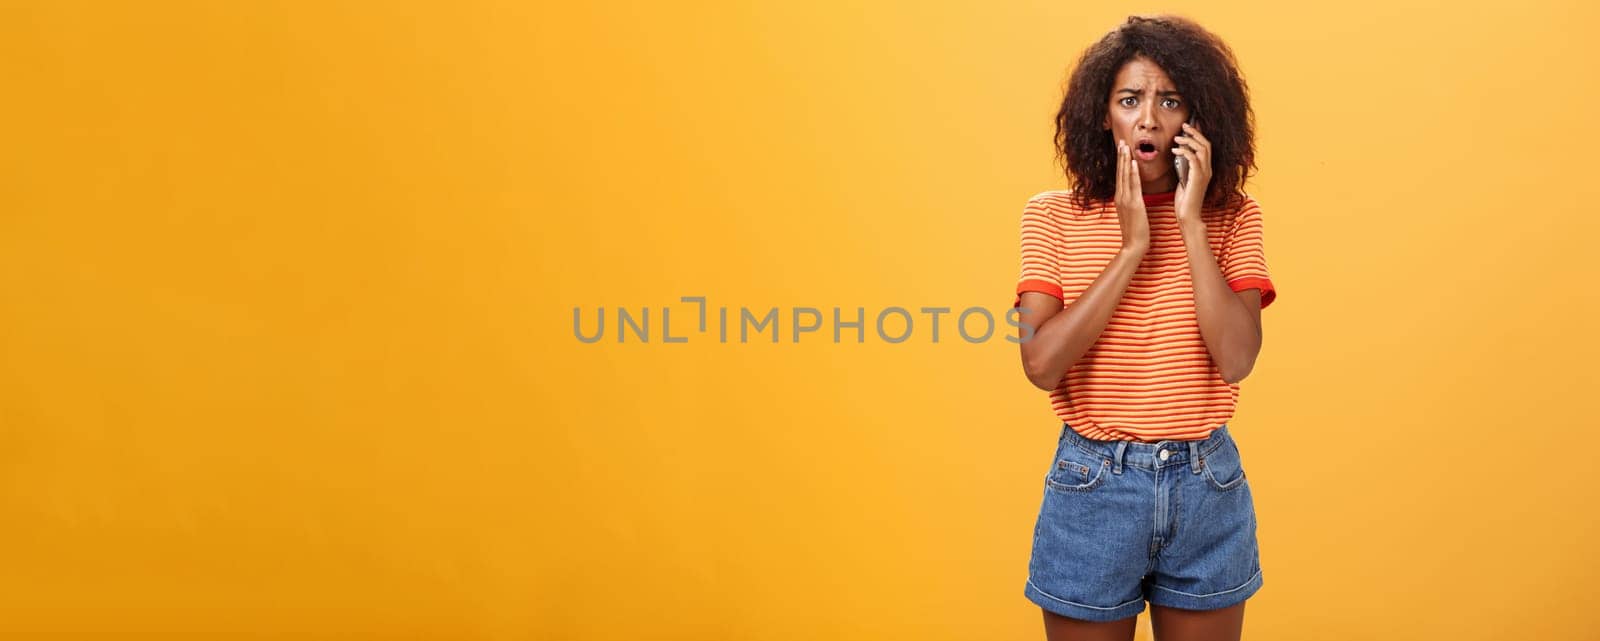 Woman receiving disturbing call feeling emapthy and sorry for poor friend getting in trouble holding cellphone near ear touching cheek concerned frowning standing sad, worried over orange background.